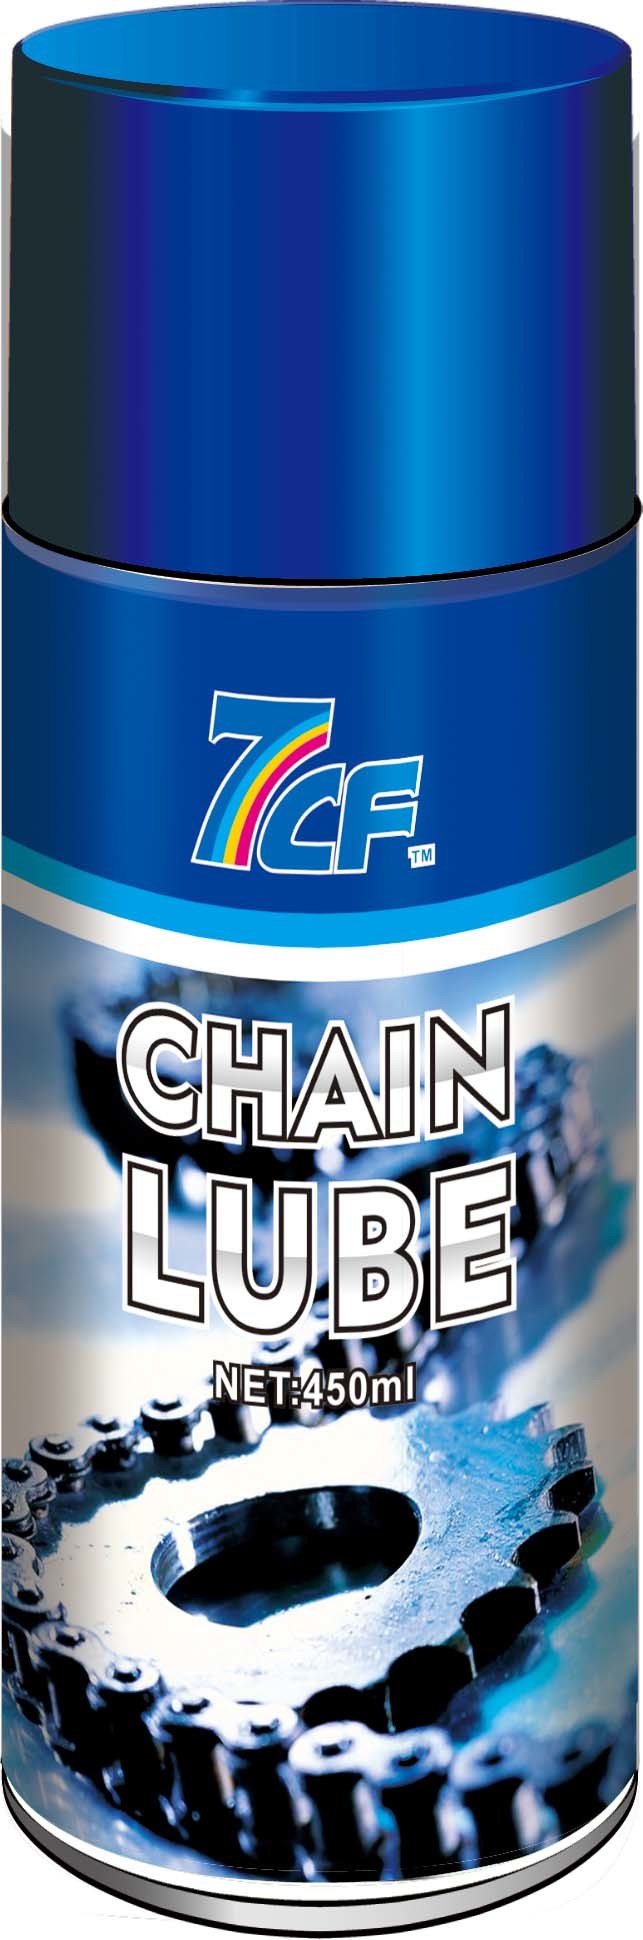 Bicycle Lubricant